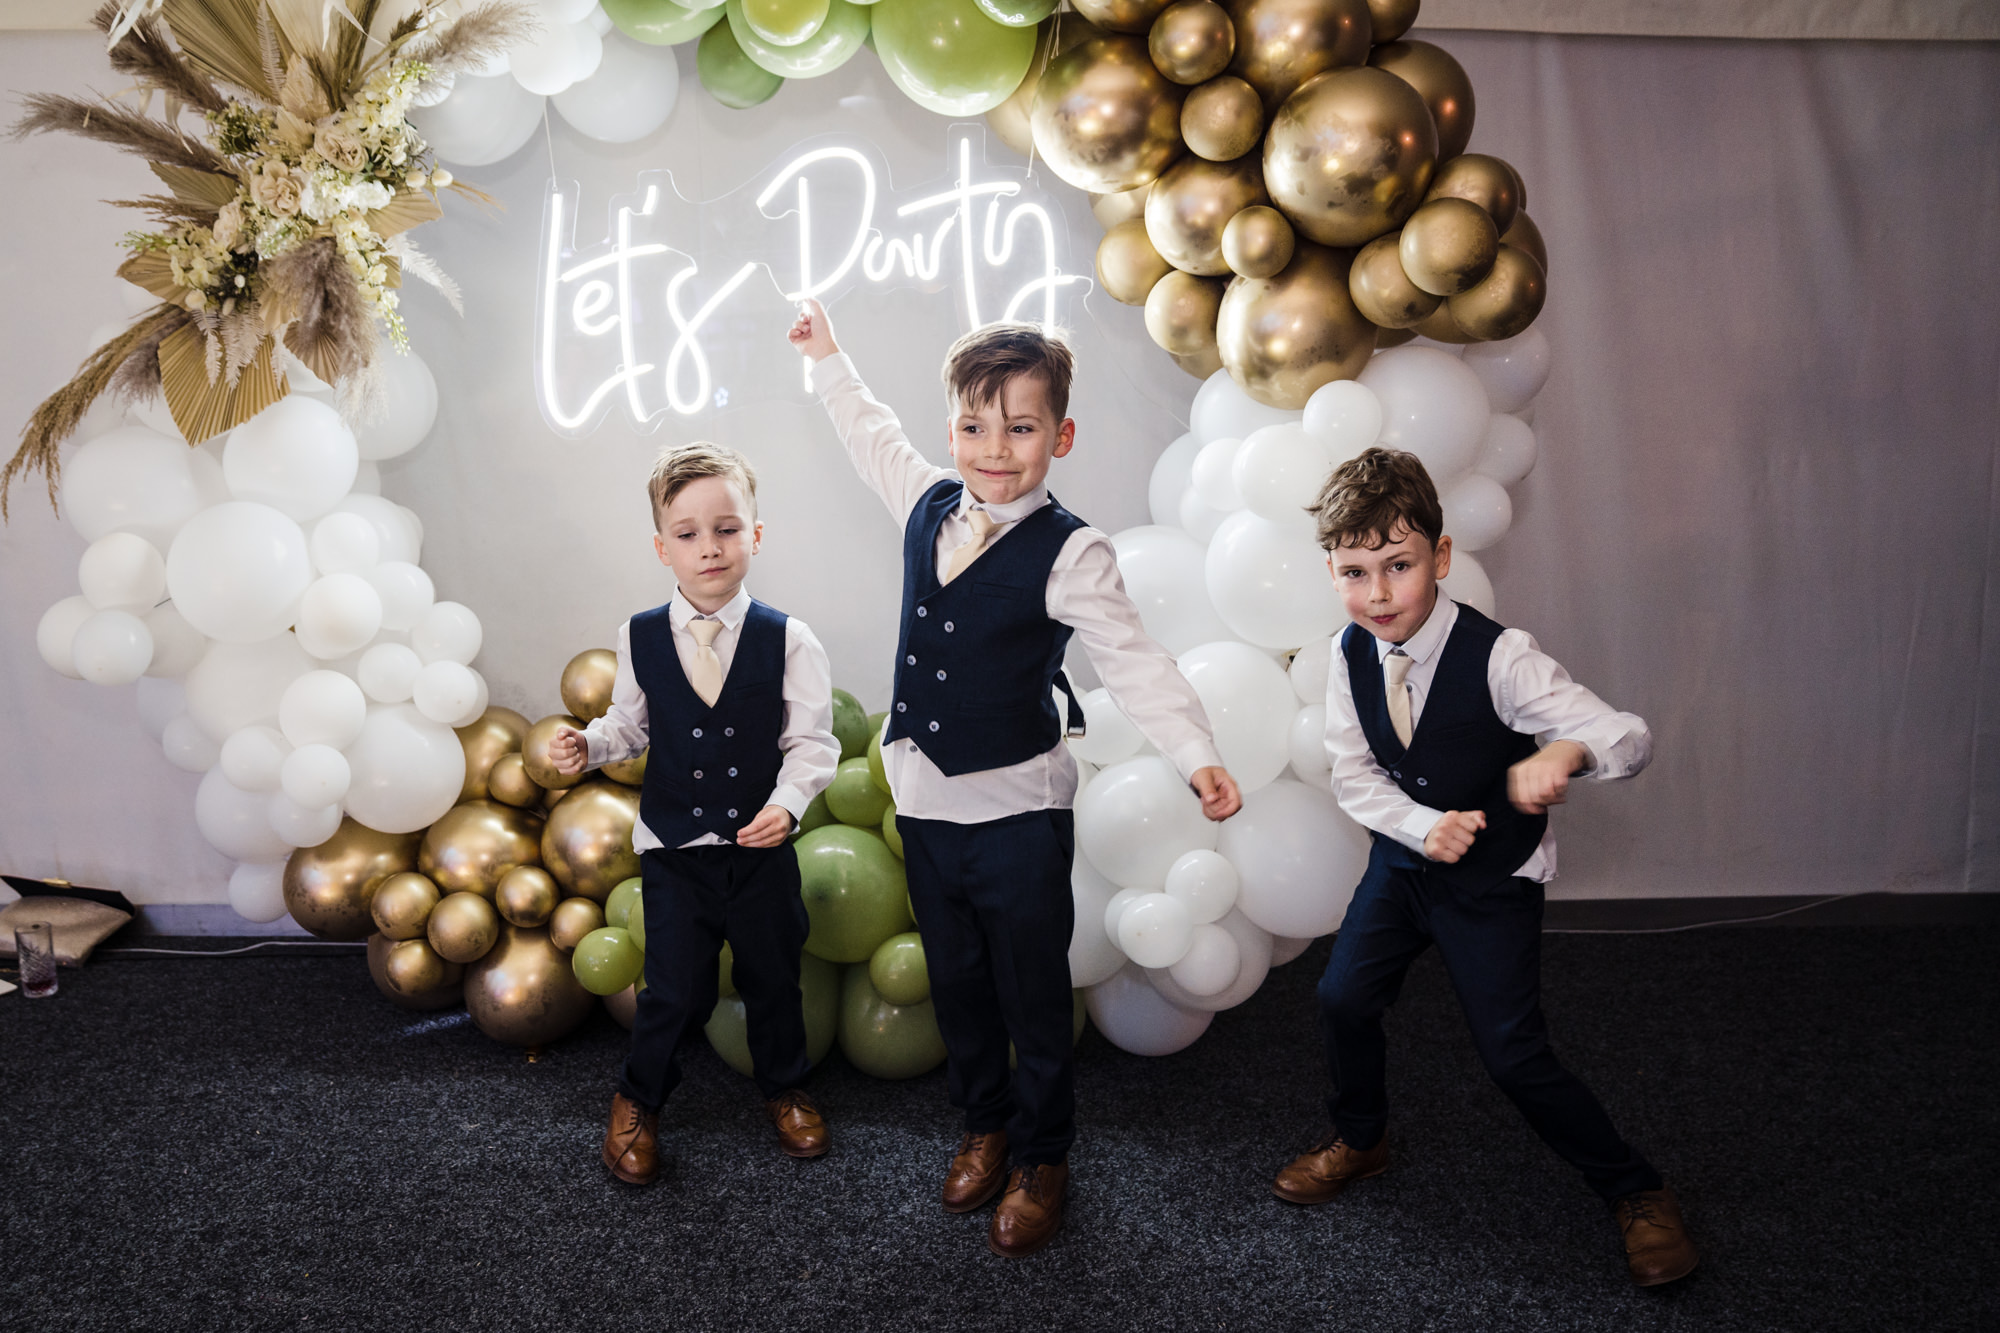 three children act silly at wedding in front of balloon arch and neon lets party sign